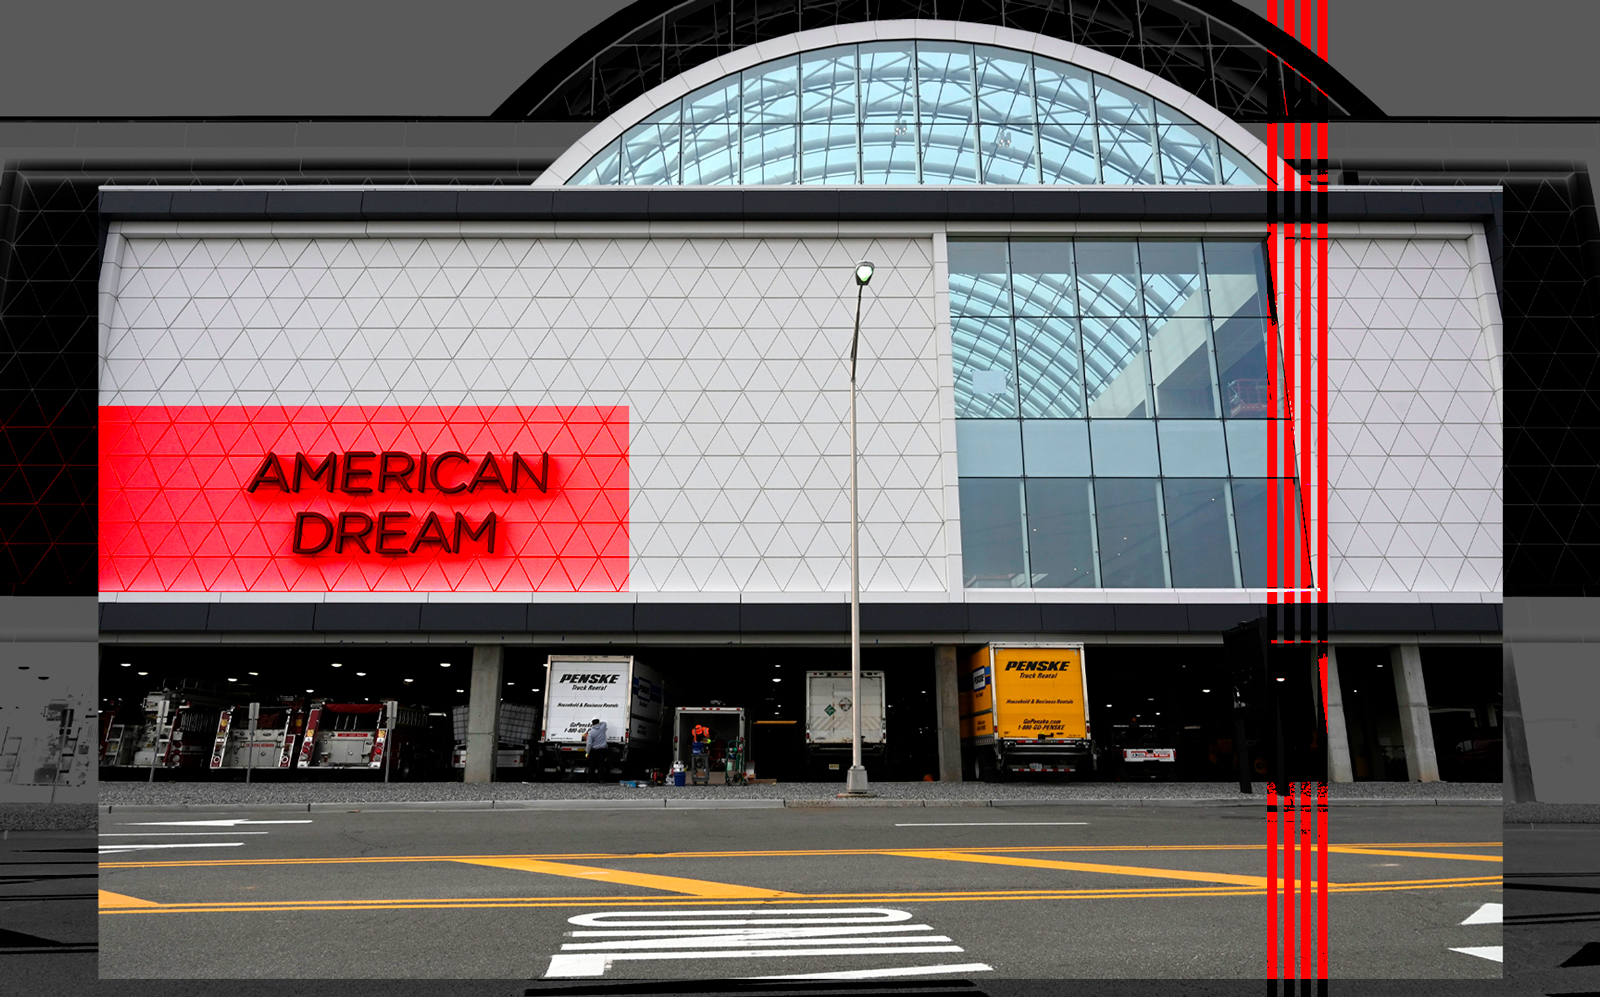 The American Dream mall in East Rutherford, New Jersey (Getty)